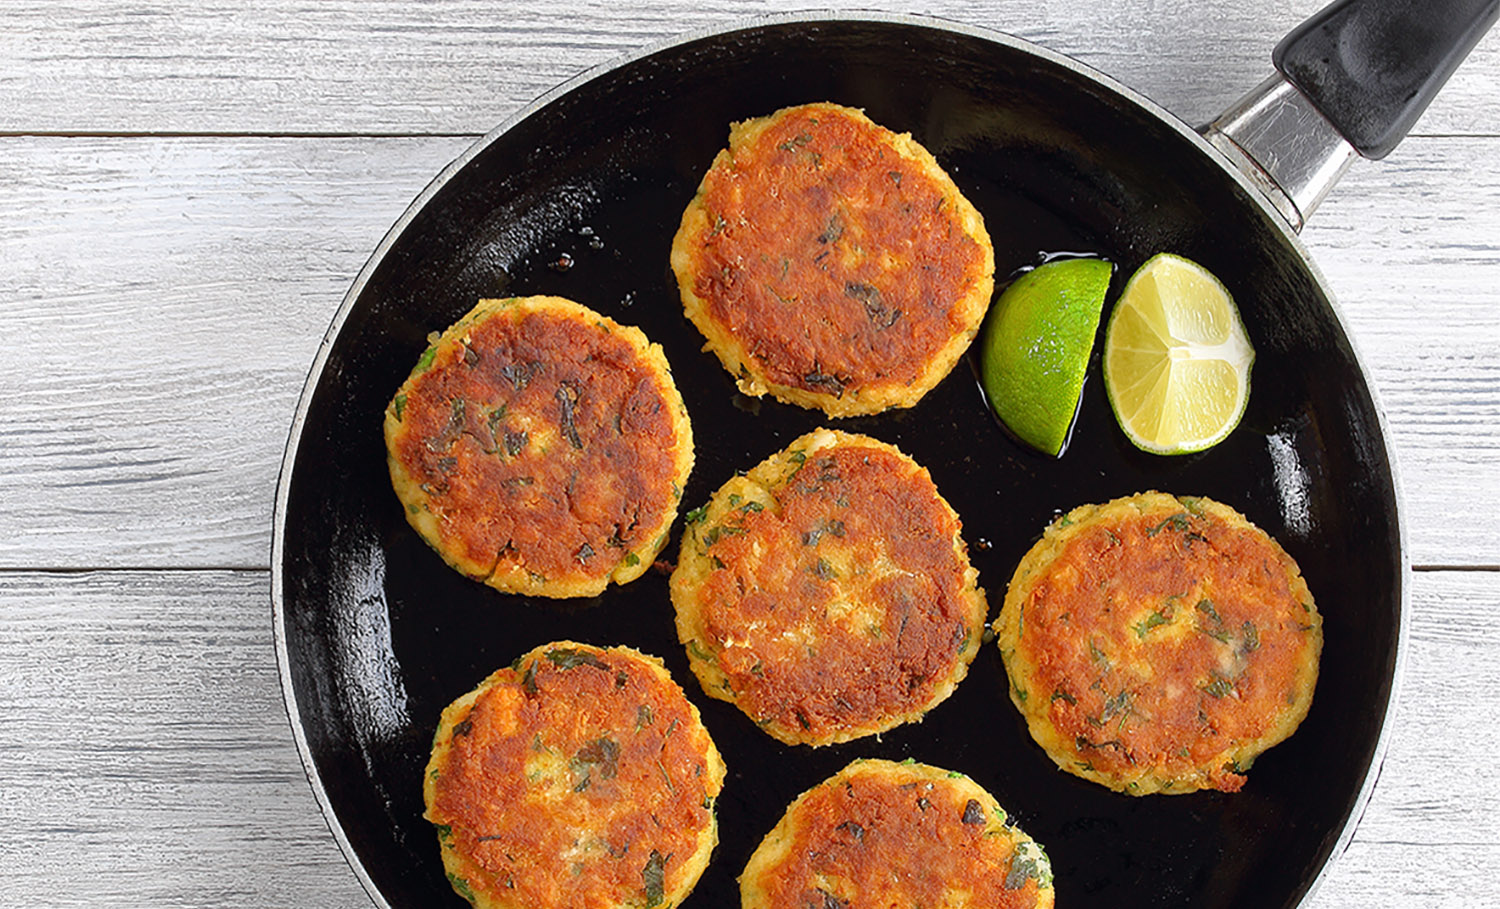 delicious fresh fried fish cakes on skillet with lime slices, authentic recipe, view from above